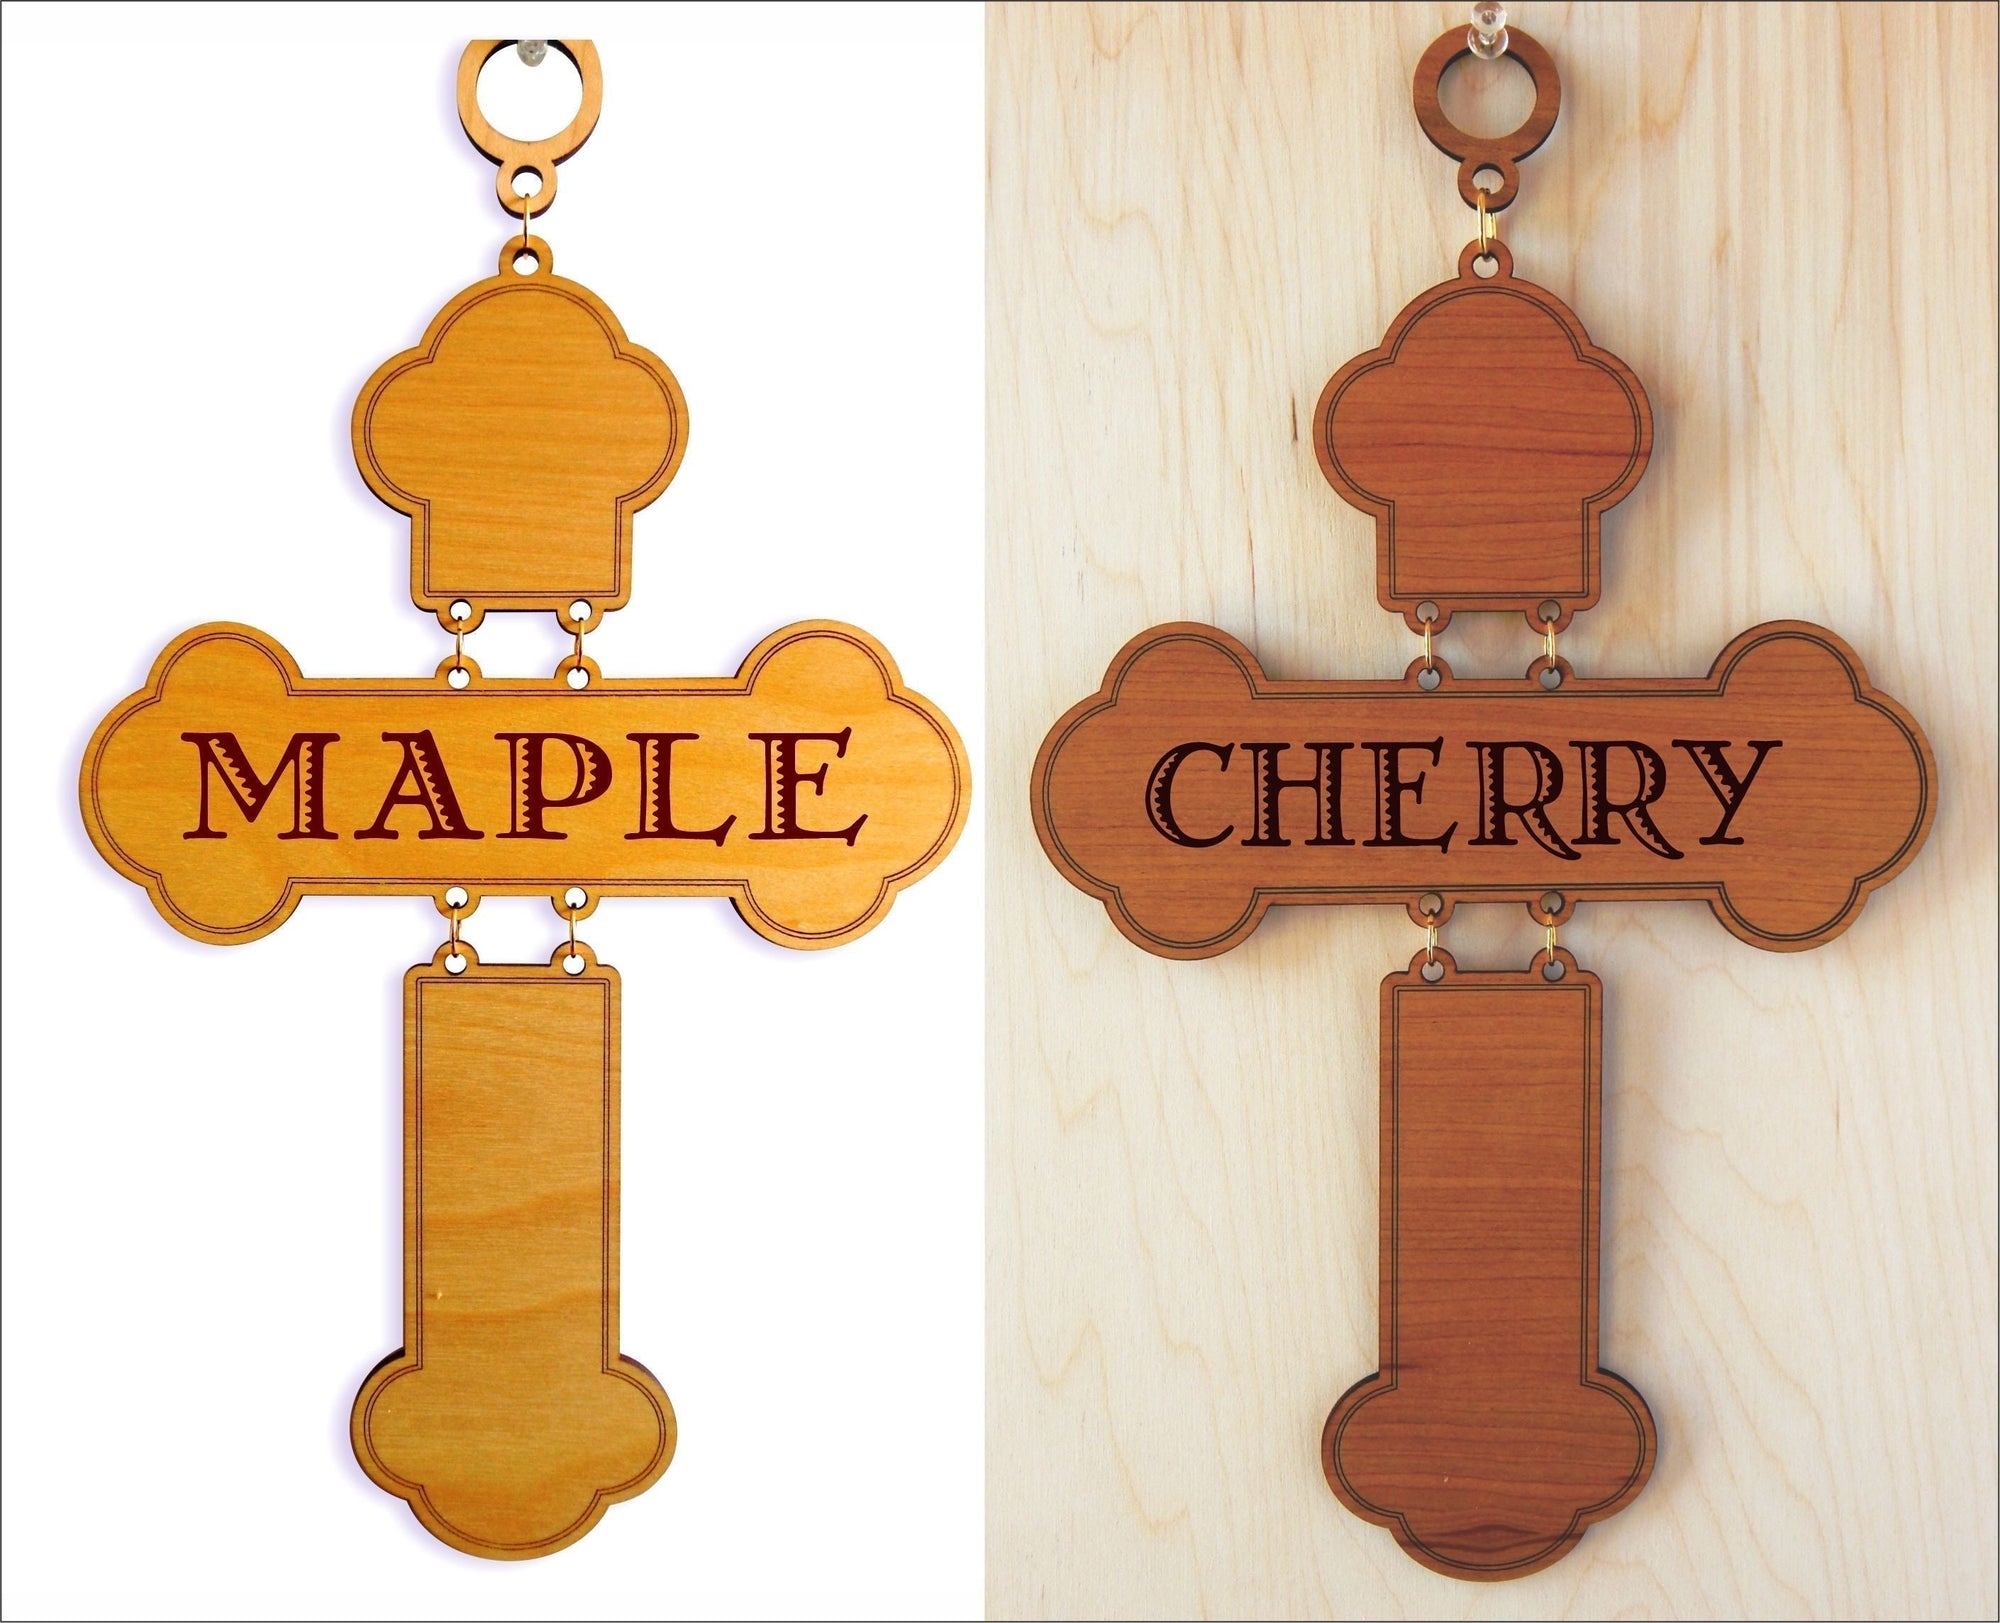 Personalized Home Gift for Dad | Religious Gift for Daddy Wall Wood Cross